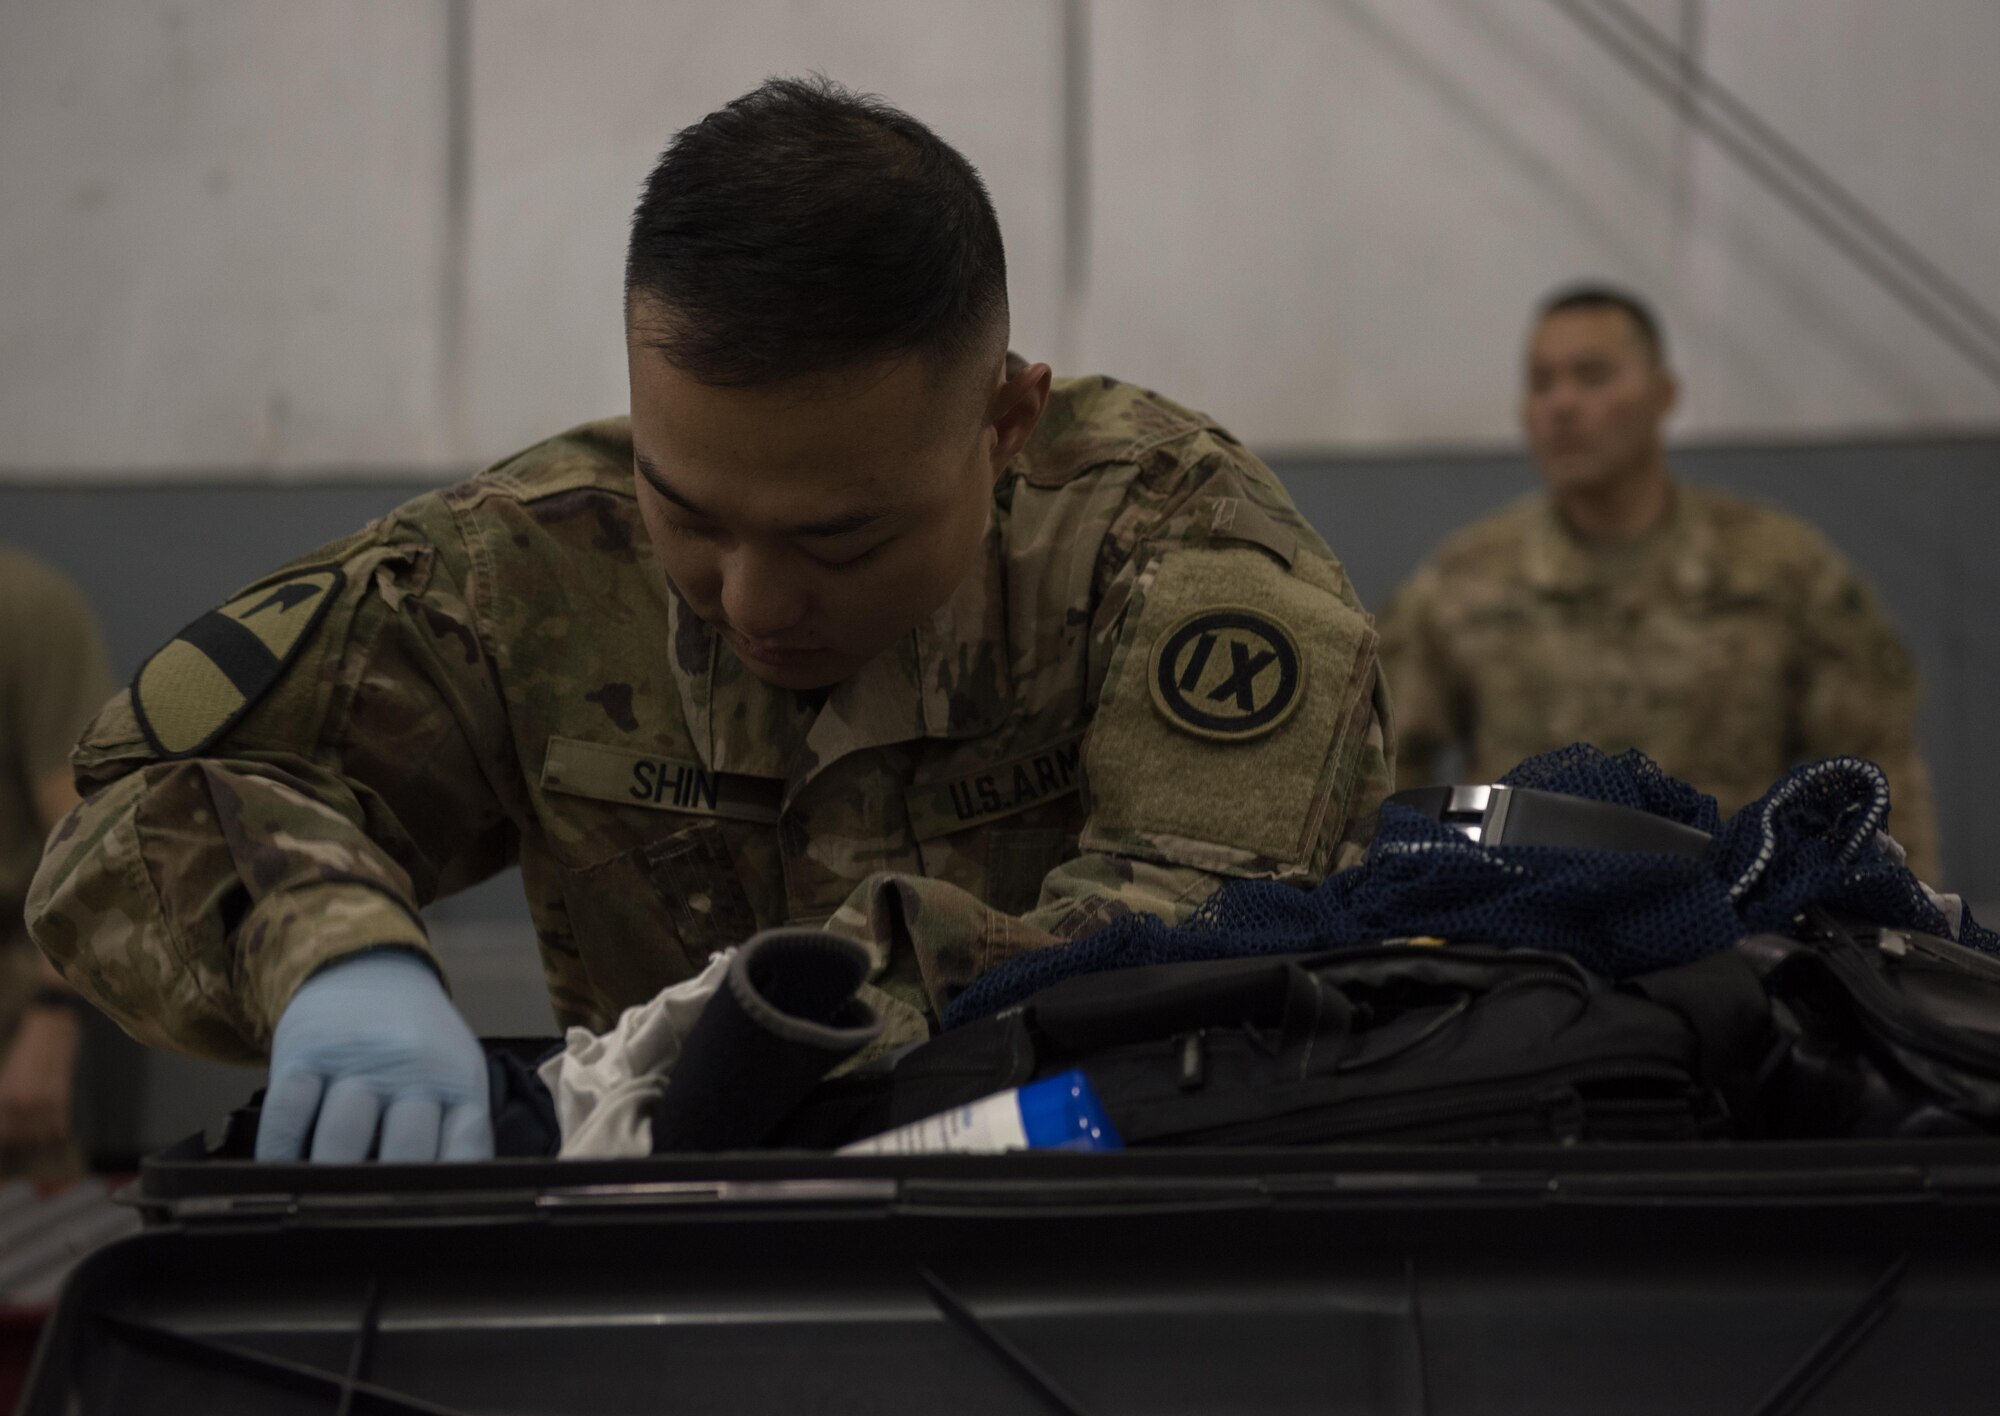 U.S. Army Spc. Jong Wook Shin, 368th Military Police Company, inspects the contents of a piece of luggage at Bagram Airfield, Afghanistan, April 30, 2017. During their inspections, the customs team follows strict guidelines of multiple governmental agencies to include the U.S. Customs and Border Protection, U.S. Department of Agriculture and Bureau of Alcohol, Tobacco, Firearms and Explosives when searching through luggage.  (U.S. Air Force photo by Staff Sgt. Benjamin Gonsier) 